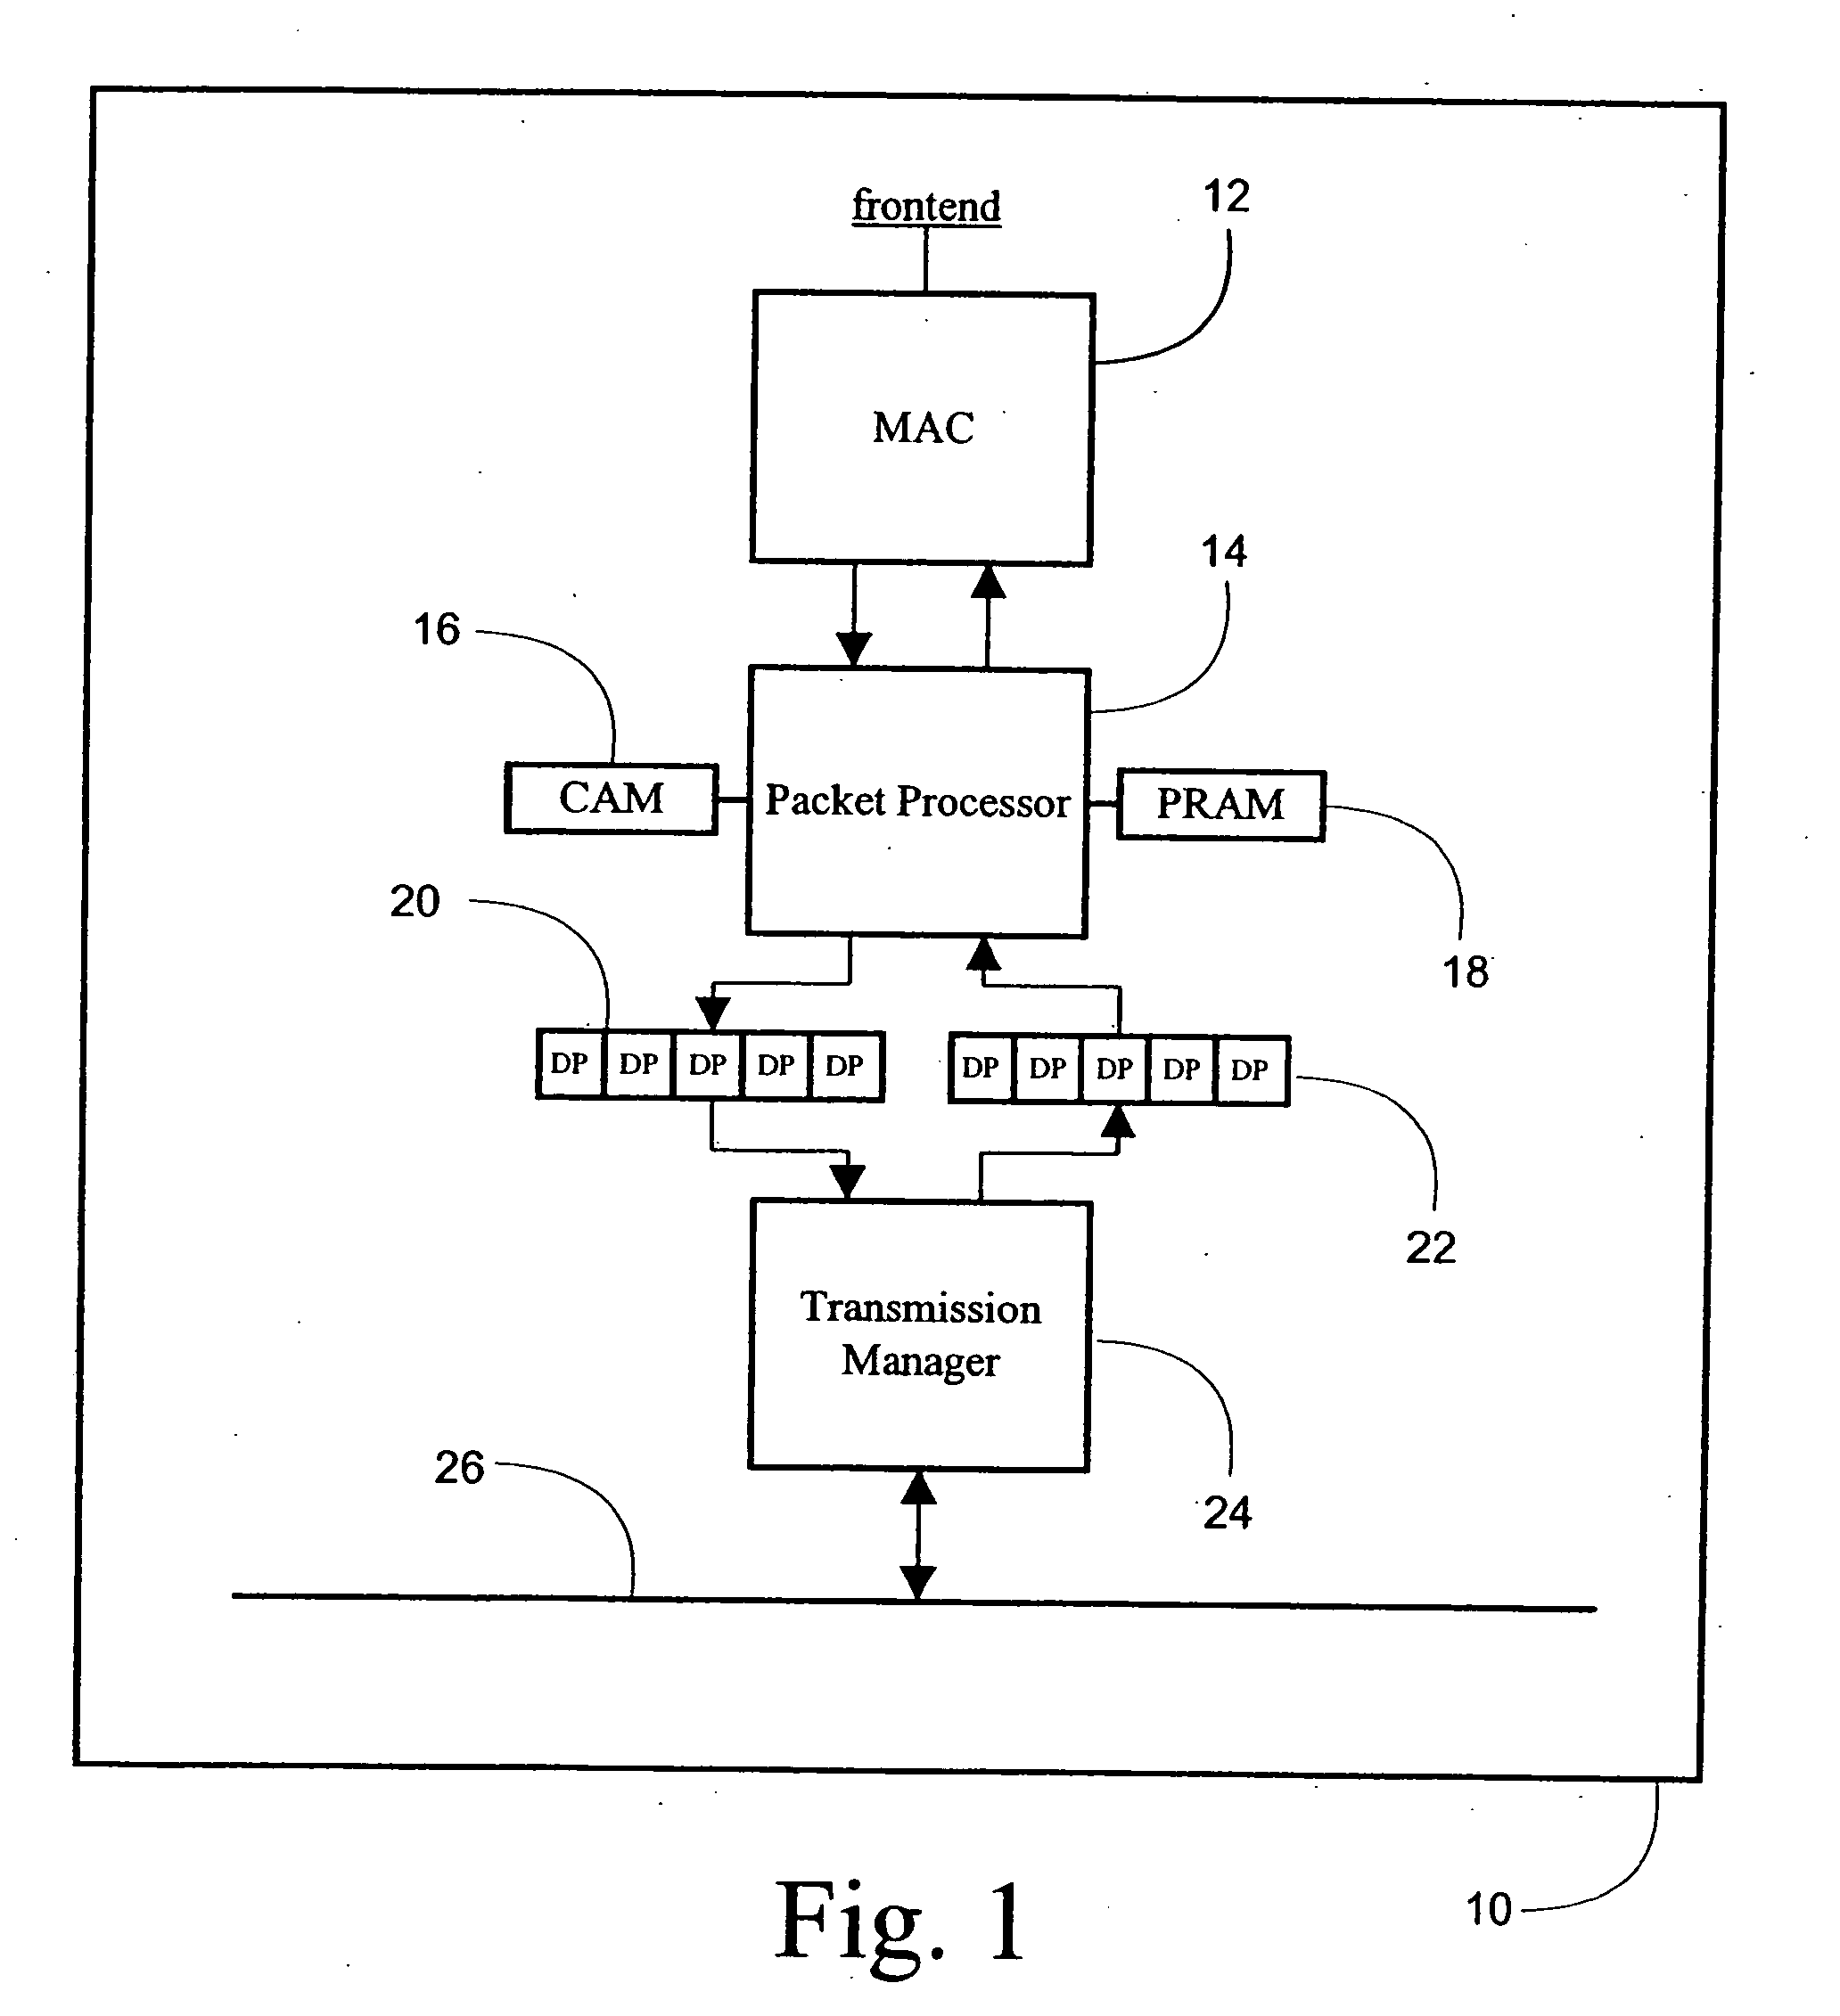 System and method for high speed packet transmission implementing dual transmit and receive pipelines